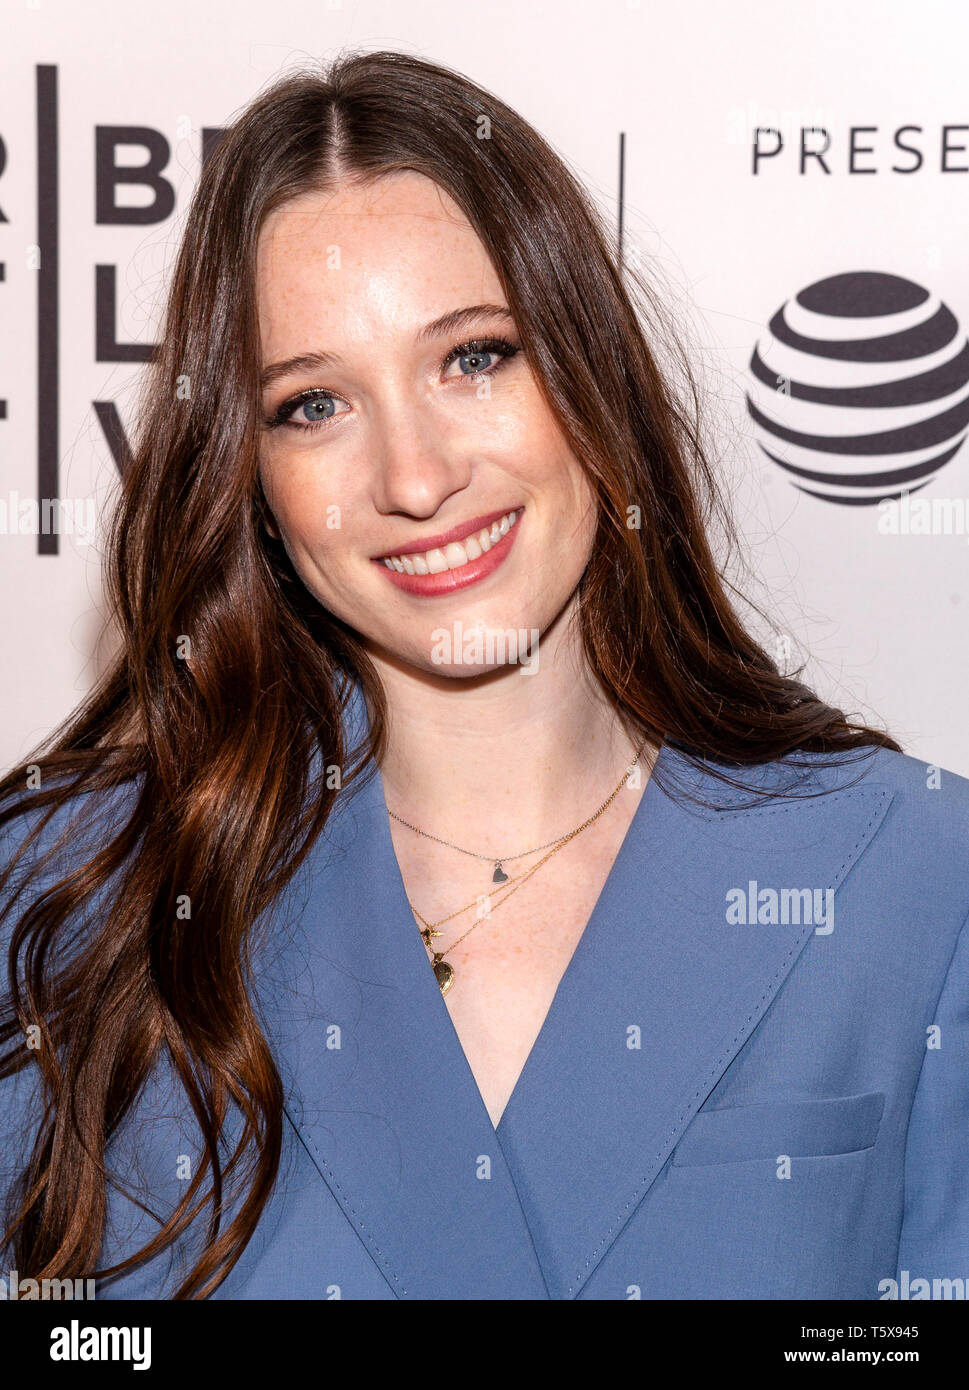 New York, NY - April 26, 2019: Sophie Lowe attends the 'Blow The Man Down' screening during the 2019 Tribeca Film Festival at SVA Theater Stock Photo